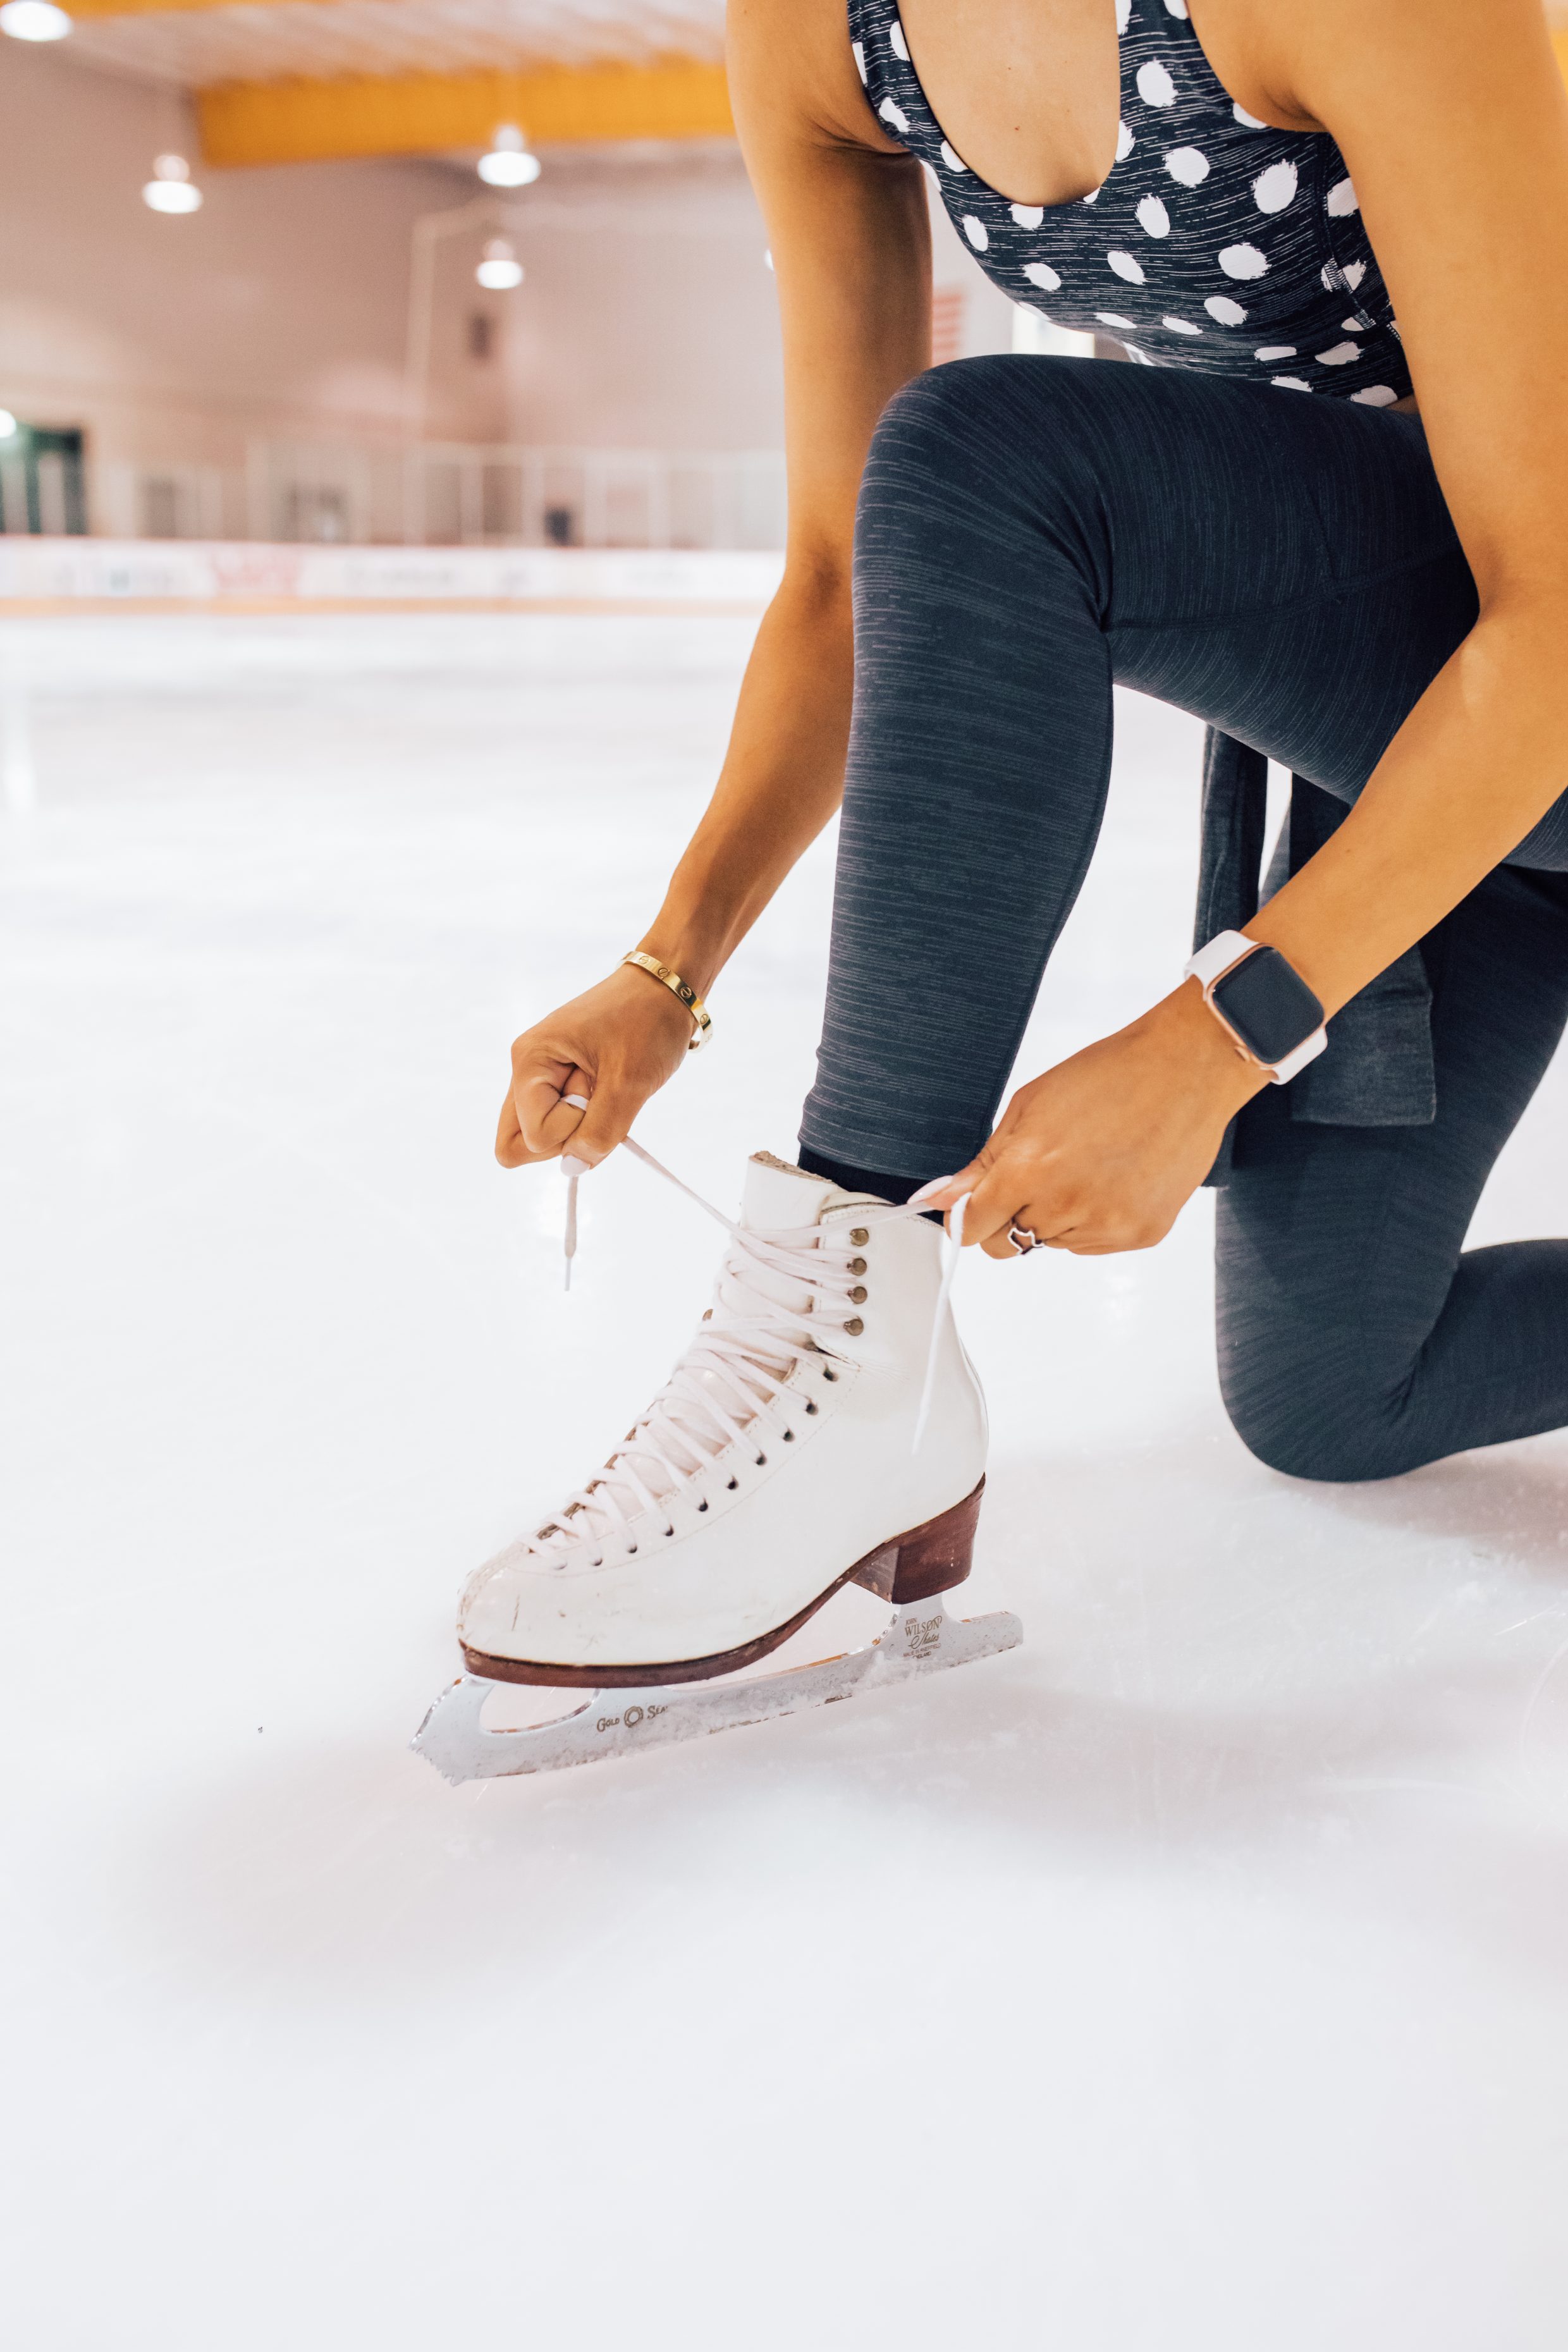 Figure skater ties her Harlick figure skating boots wearing Outdoor Voices tech sweat